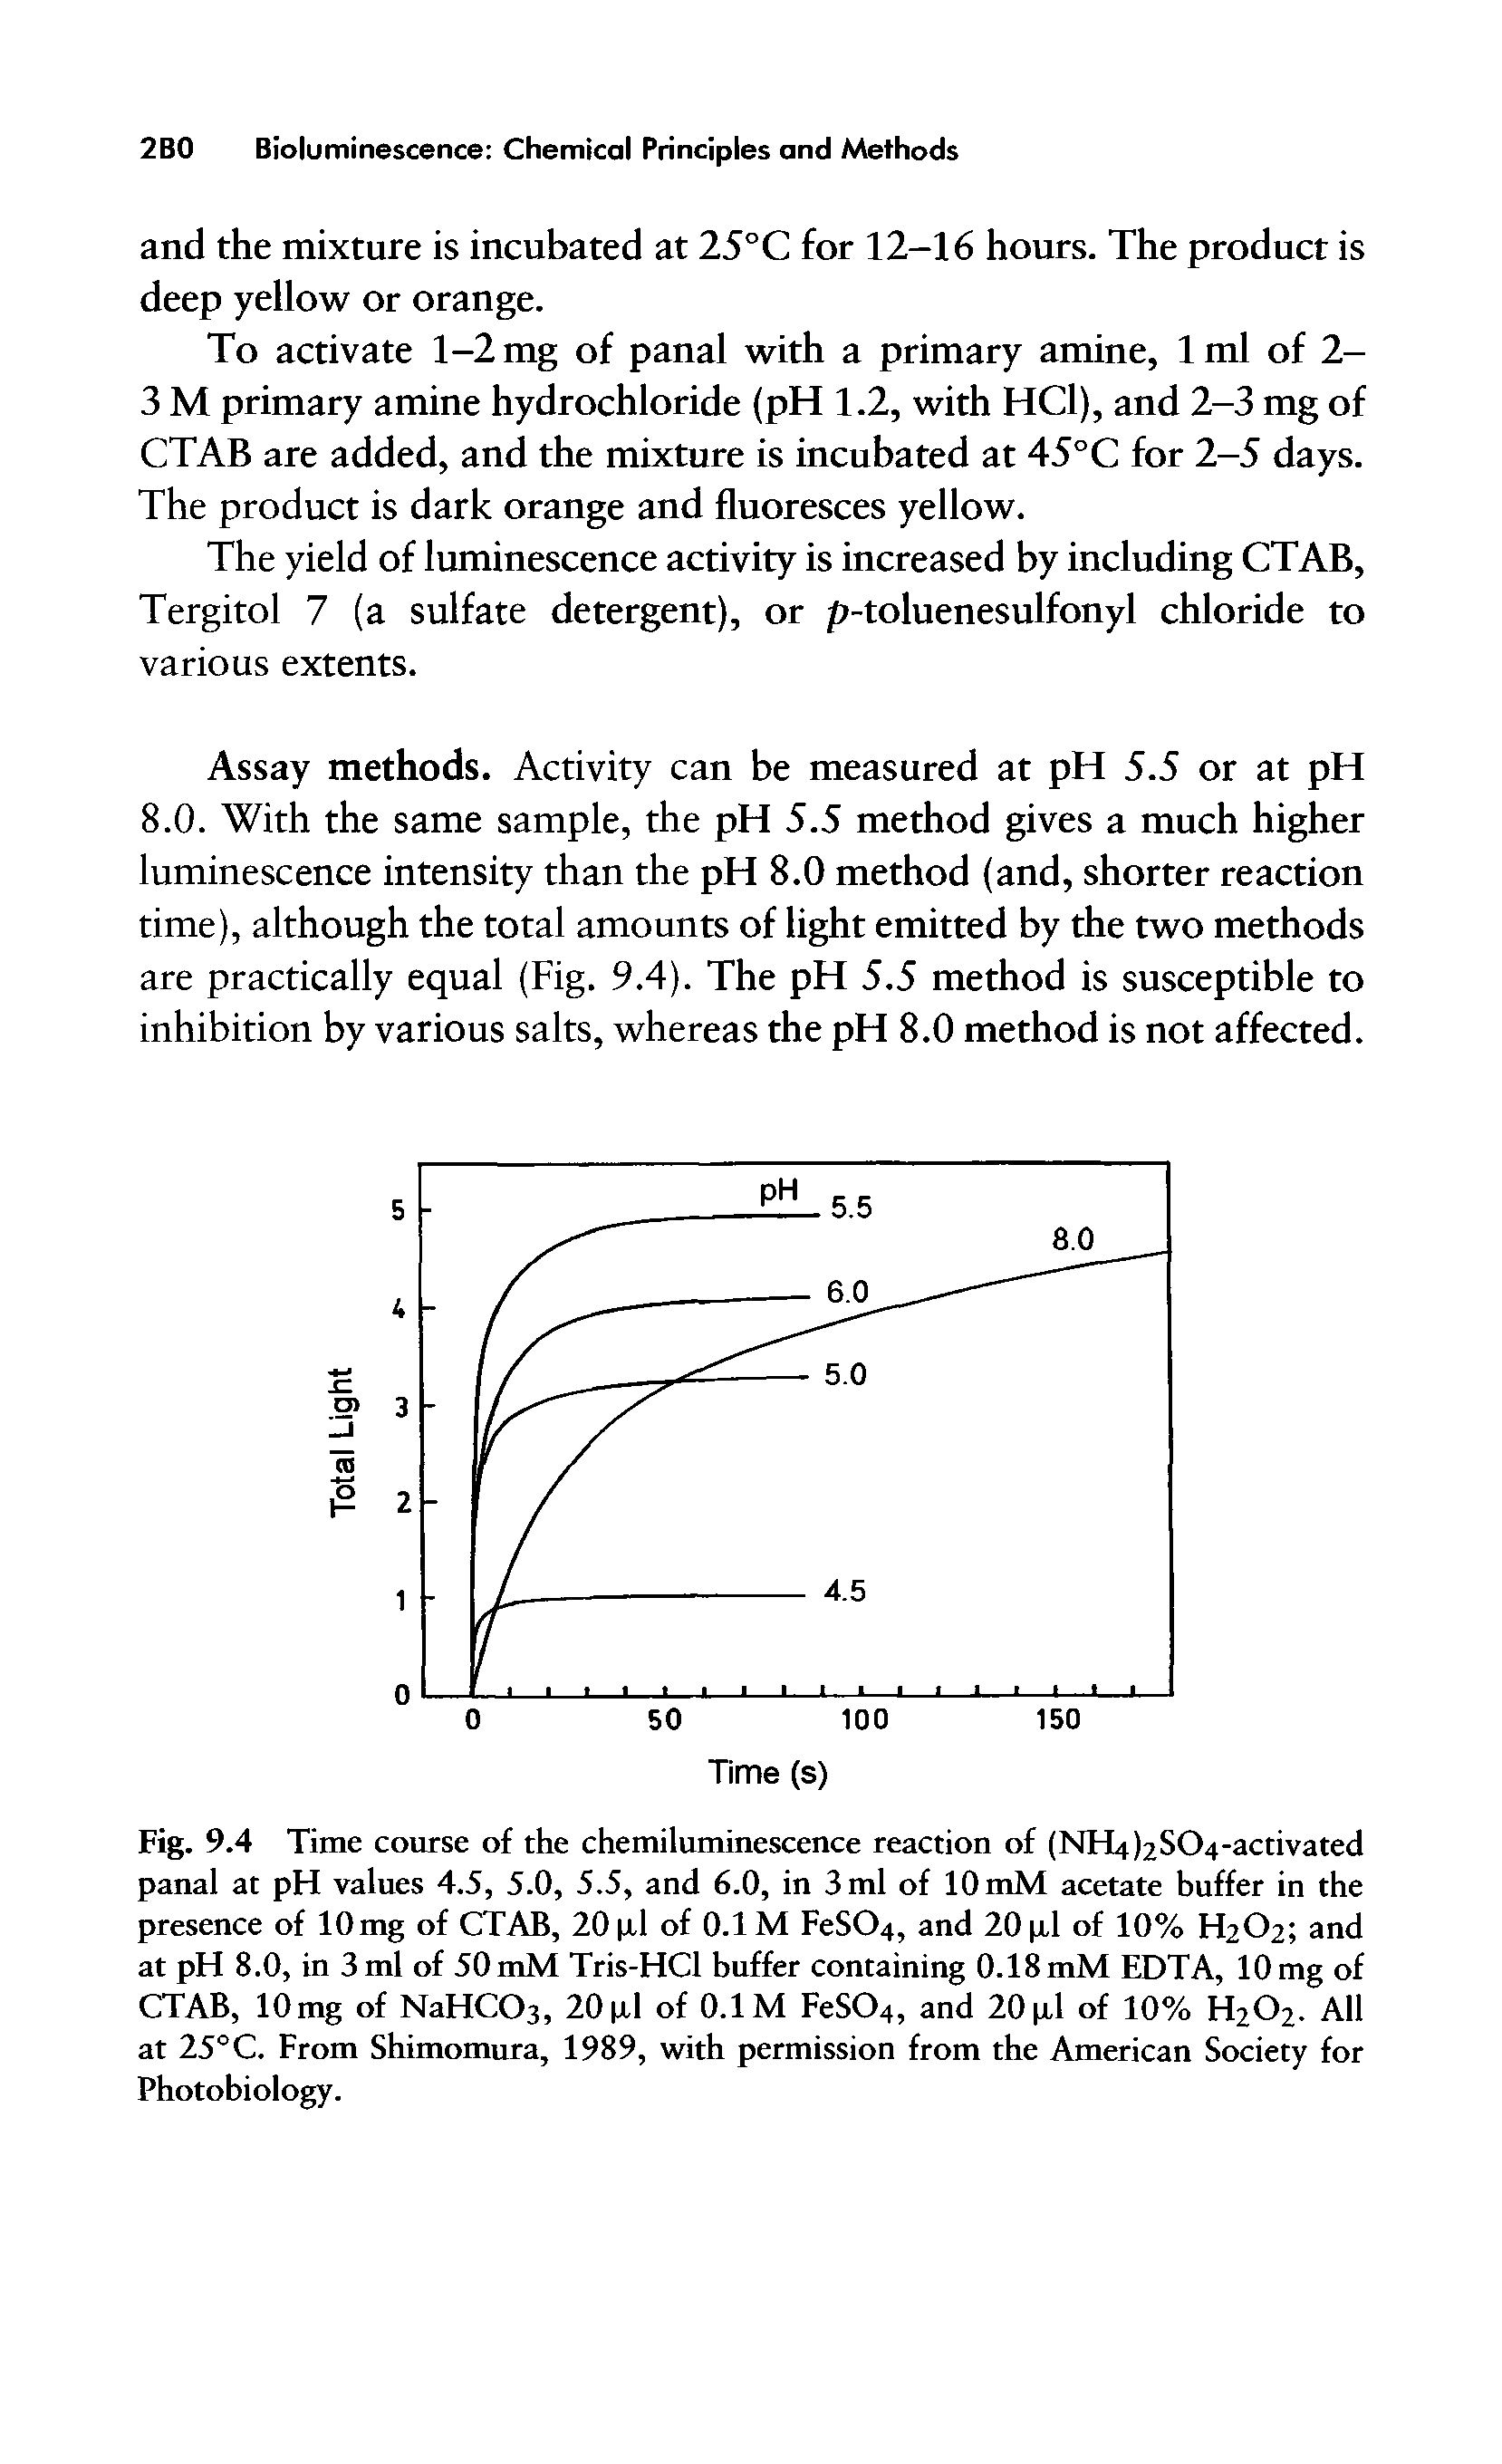 Fig. 9.4 Time course of the chemiluminescence reaction of (NH SO t -activated panal at pH values 4.5, 5.0, 5.5, and 6.0, in 3 ml of 10 mM acetate buffer in the presence of lOmg of CTAB, 20 pi of 0.1 M FeSC>4, and 20 pi of 10% H2O2 and at pH 8.0, in 3 ml of 50 mM Tris-HCl buffer containing 0.18 mM EDTA, 10 mg of CTAB, lOmg of NaHCC>3, 20pi of 0.1 M FeSC>4, and 20pi of 10% H2O2. All at 25°C. From Shimomura, 1989, with permission from the American Society for Photobiology.